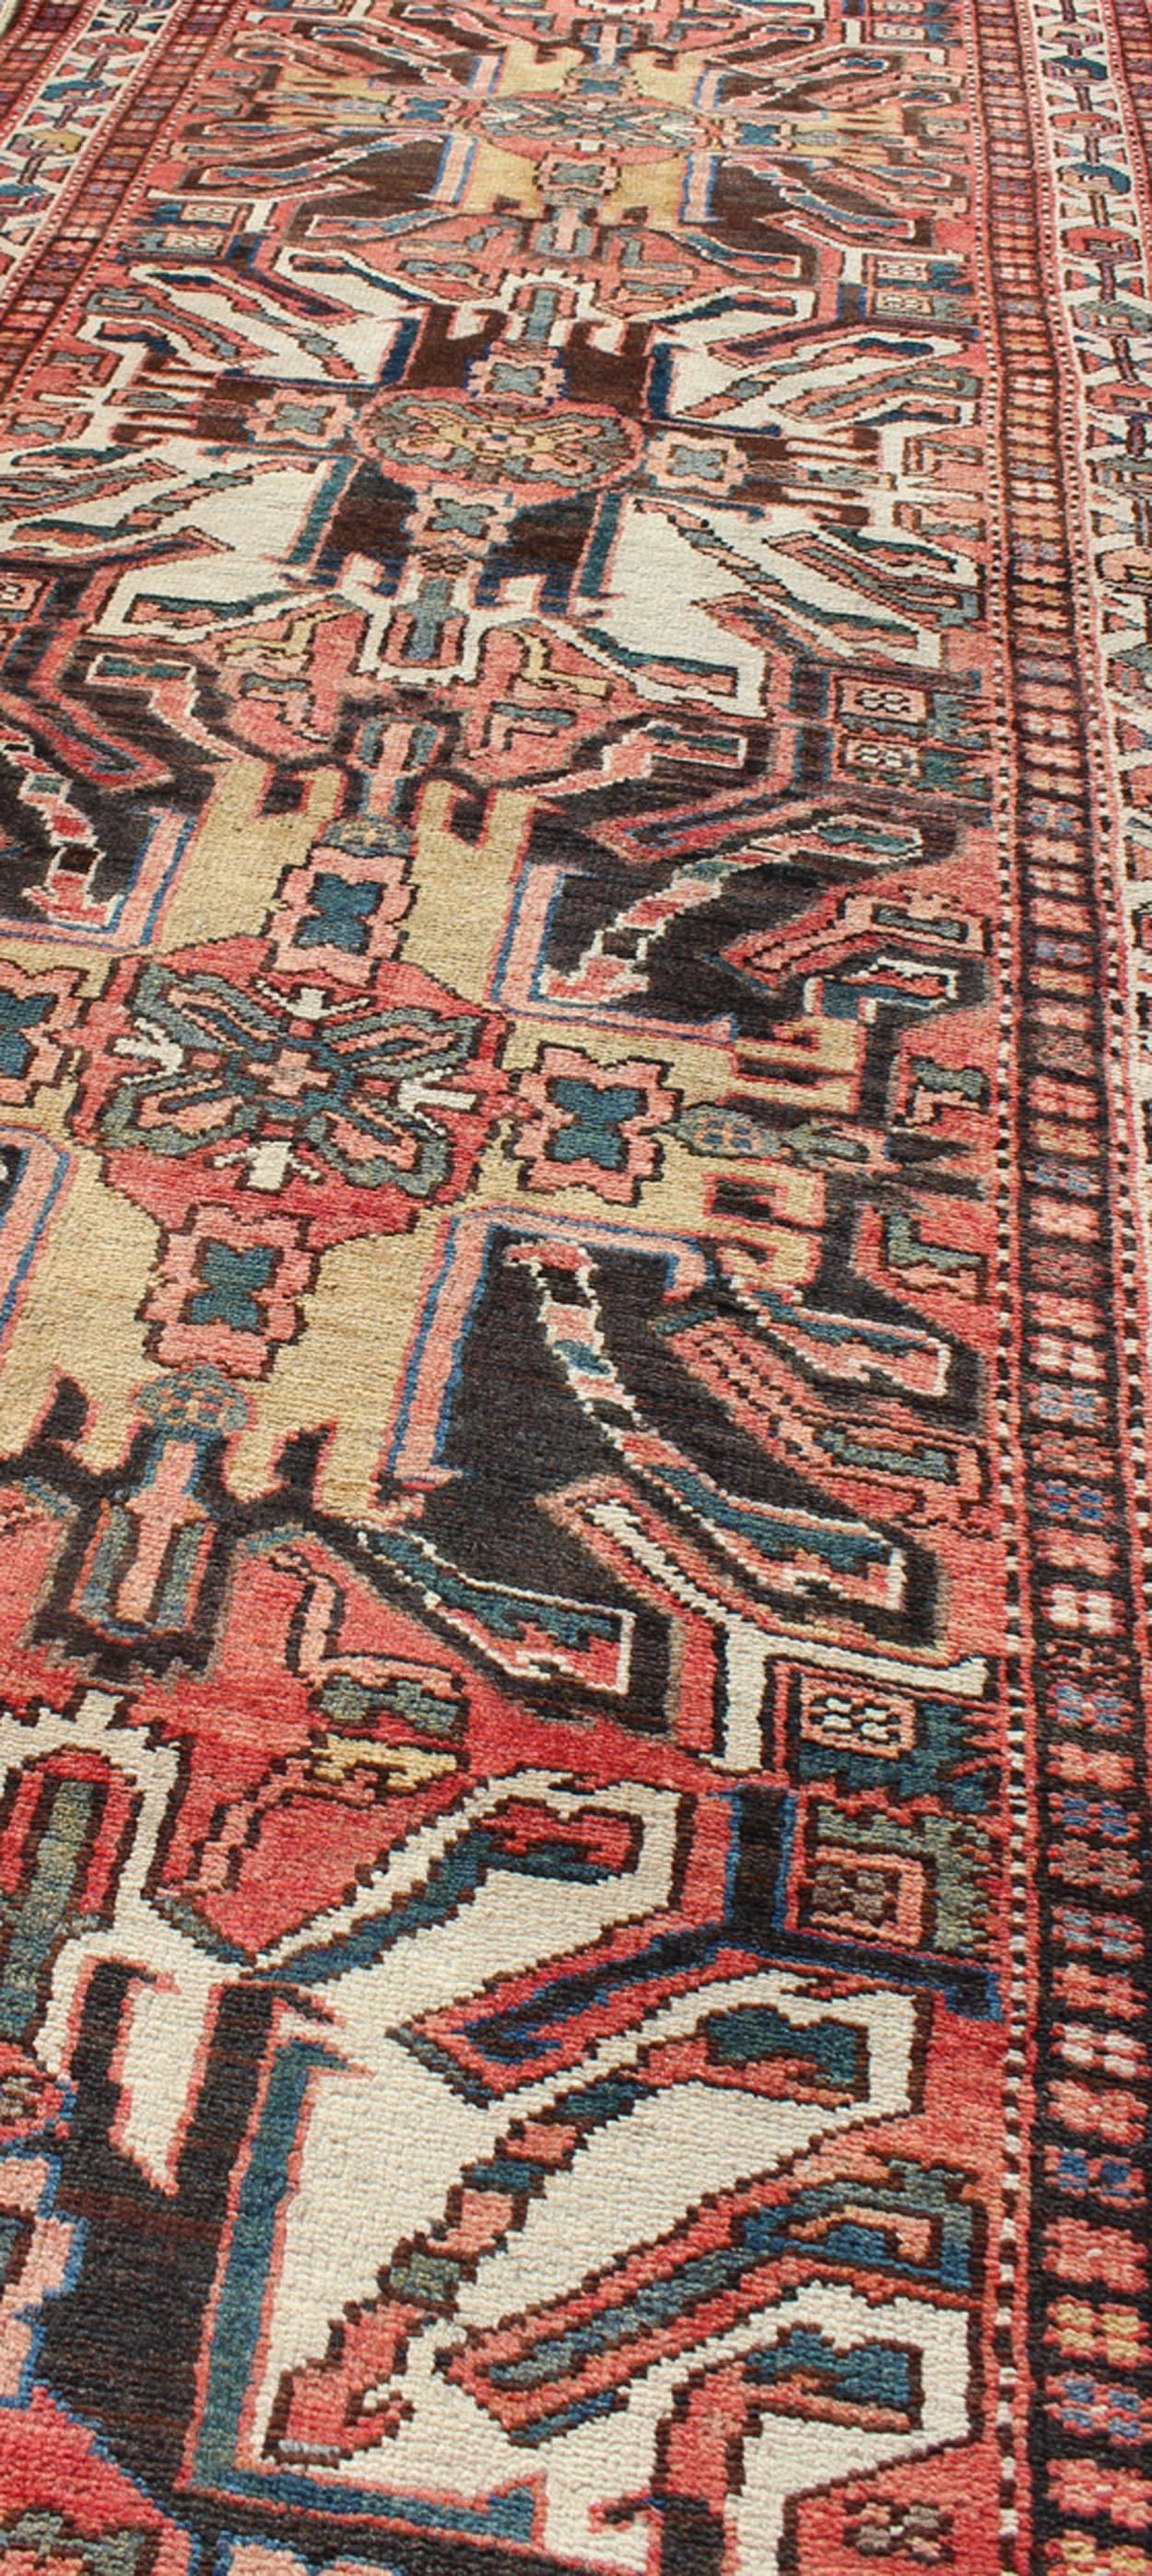 Multicolored Antique Persian Karajeh Runner with Geometric-Tribal Medallions In Good Condition For Sale In Atlanta, GA